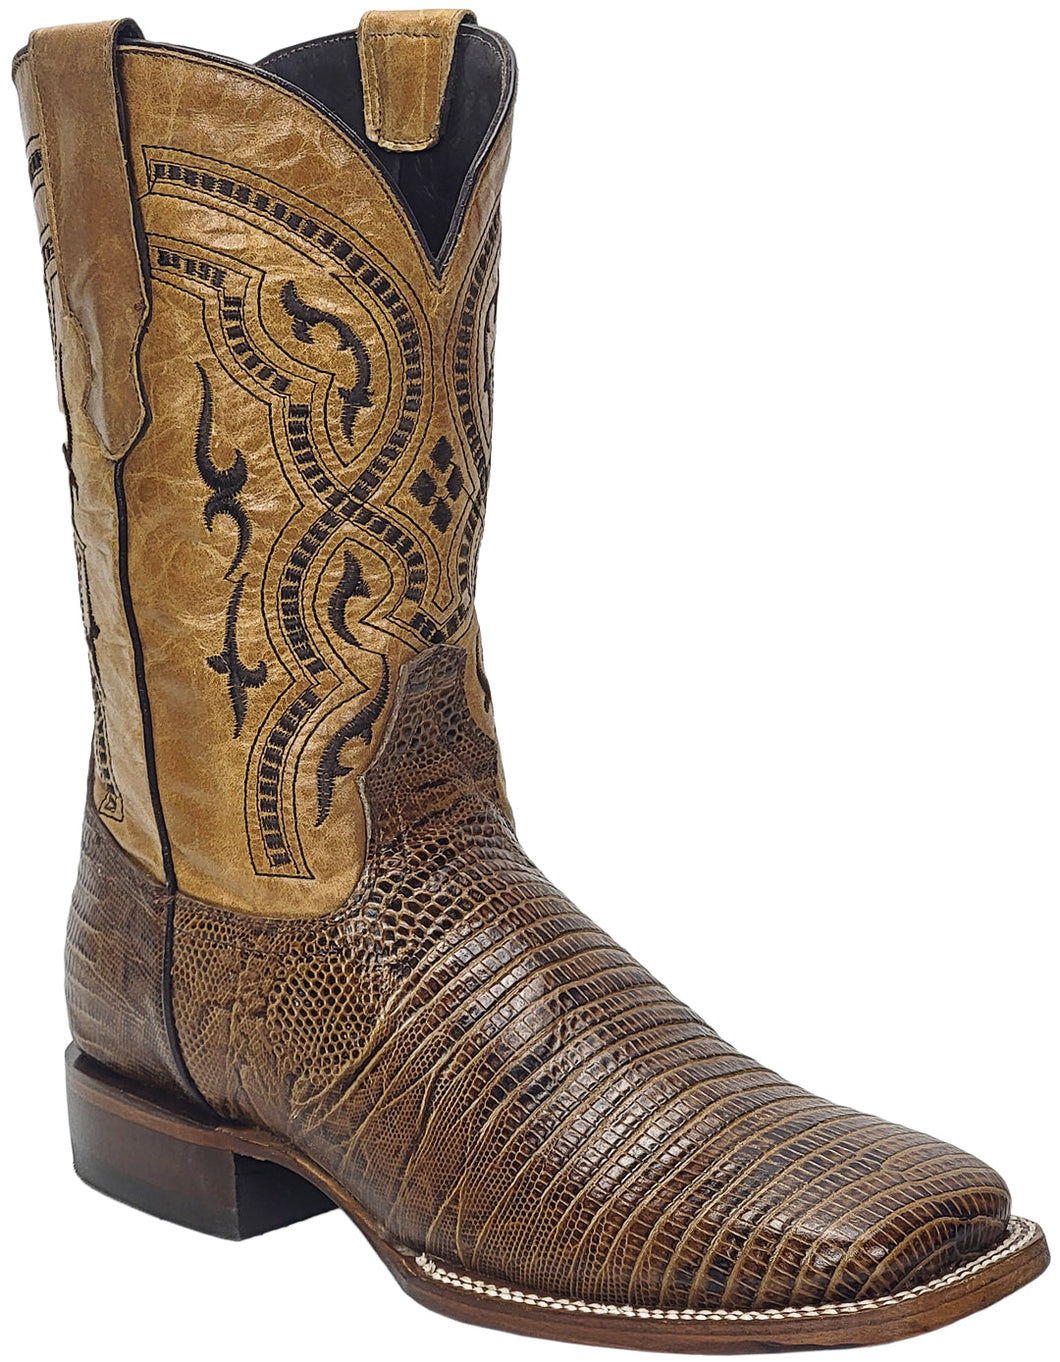 Silverton Lizard Print Leather Wide Square Toe Boots (Honey)